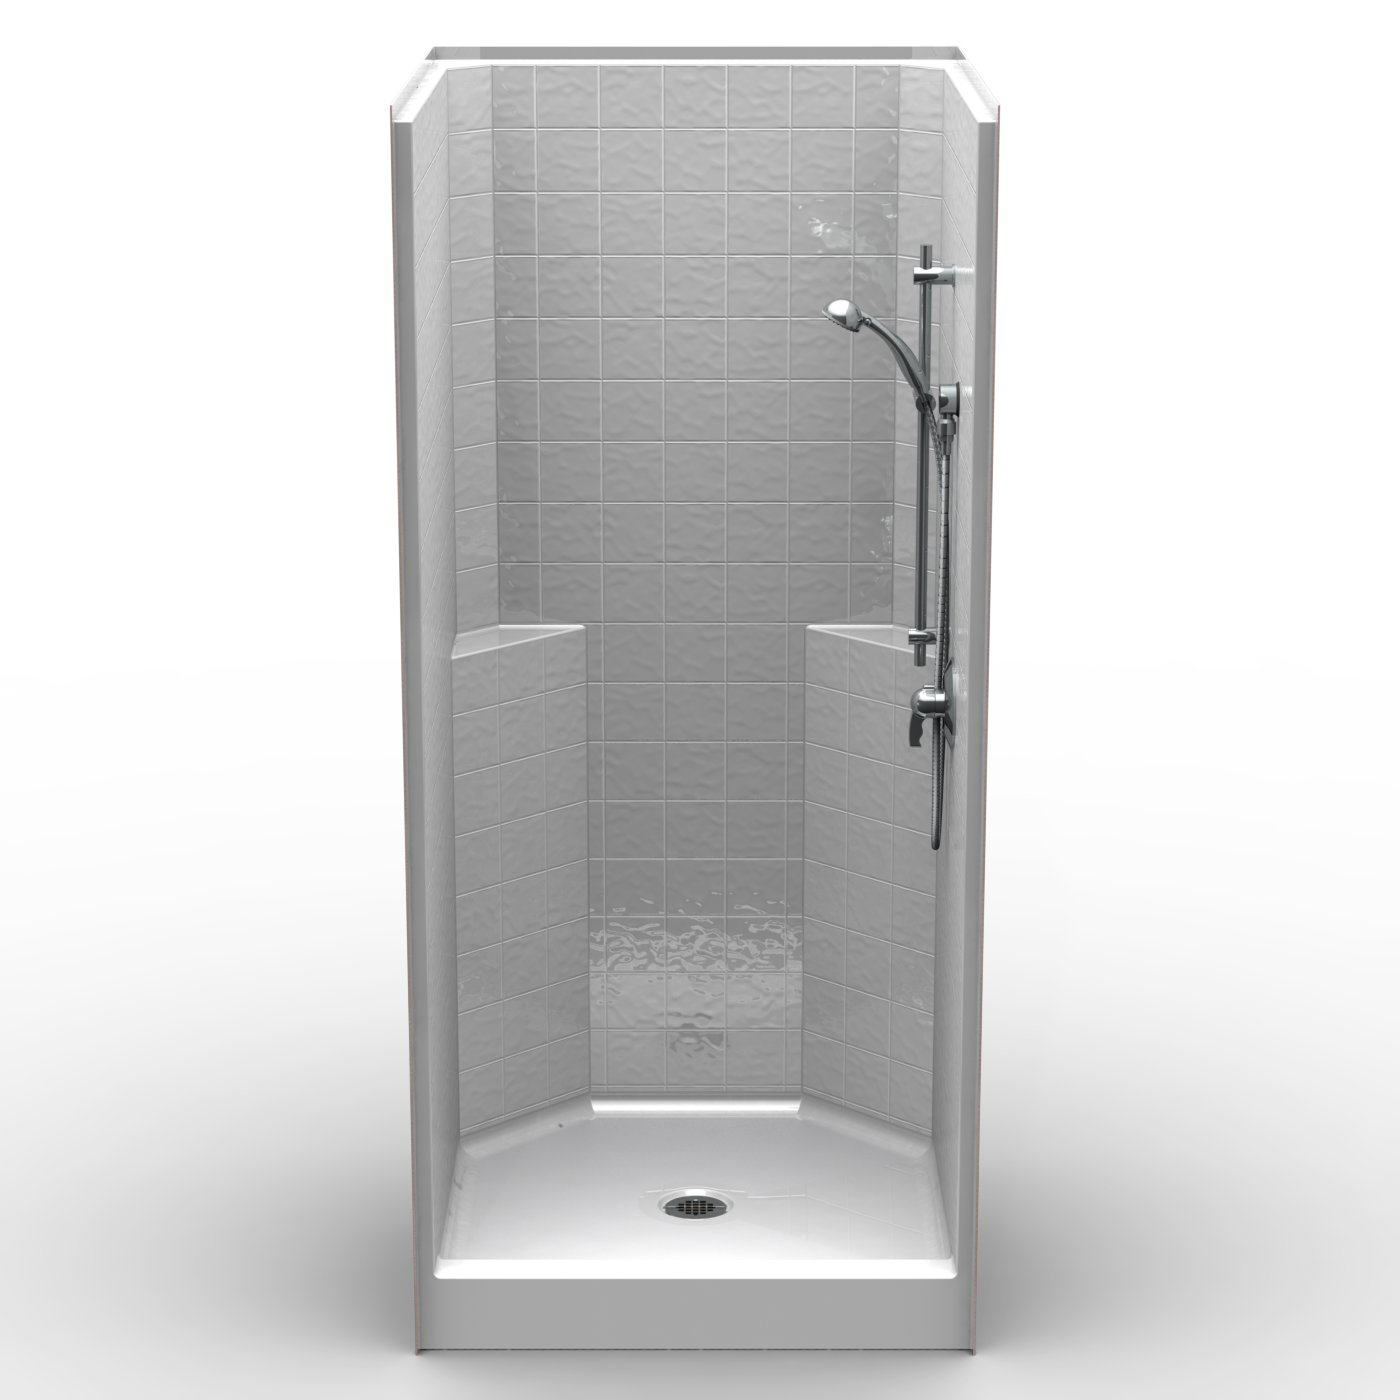 Single Piece Curbed 36 x 36 x 79 Shower  Curbed 